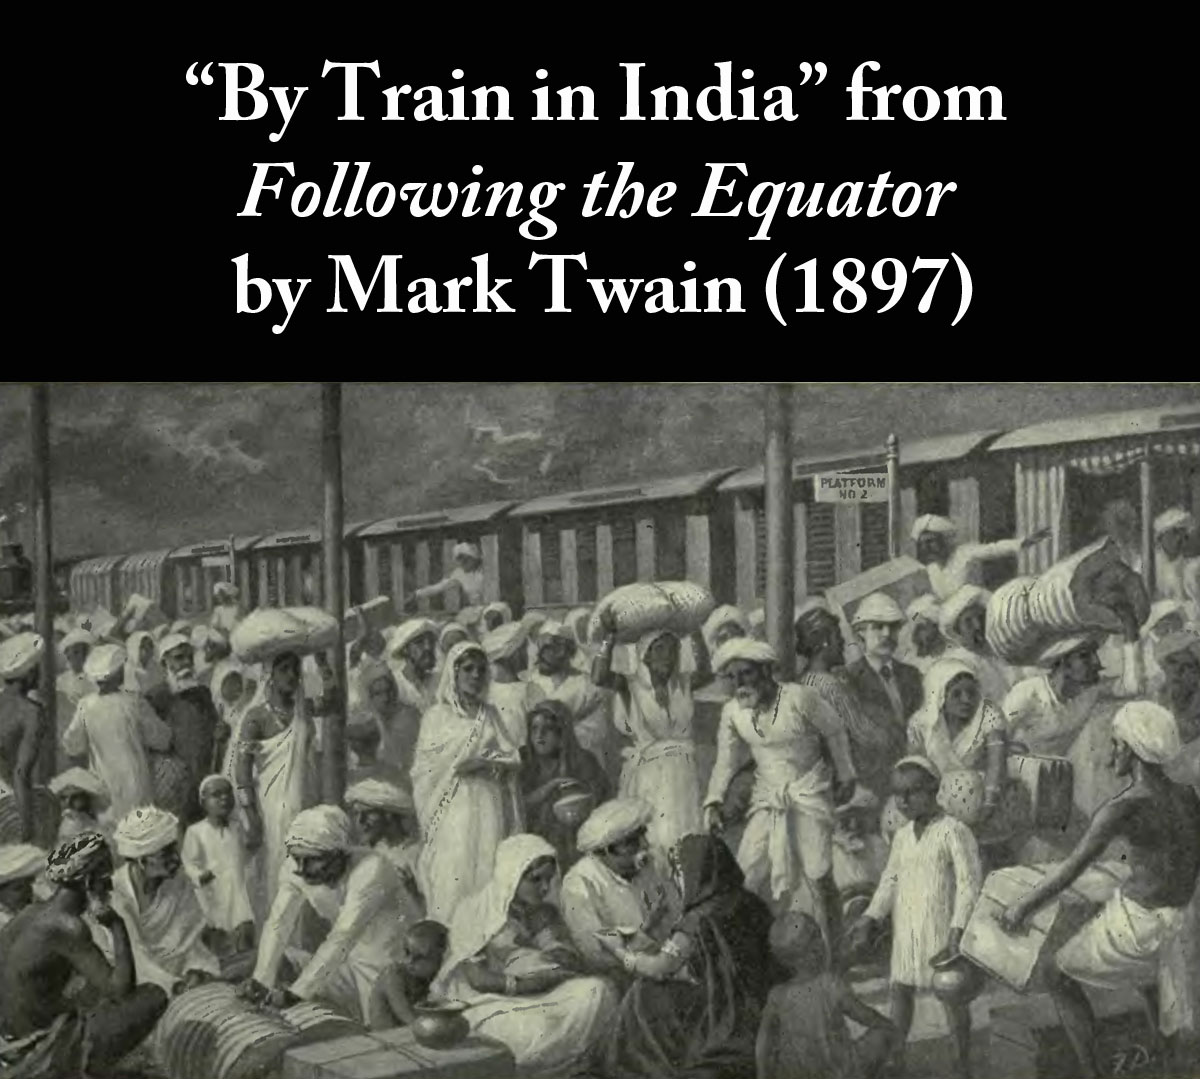 By Train in India from Following the Equator by Mark Twain (1897)